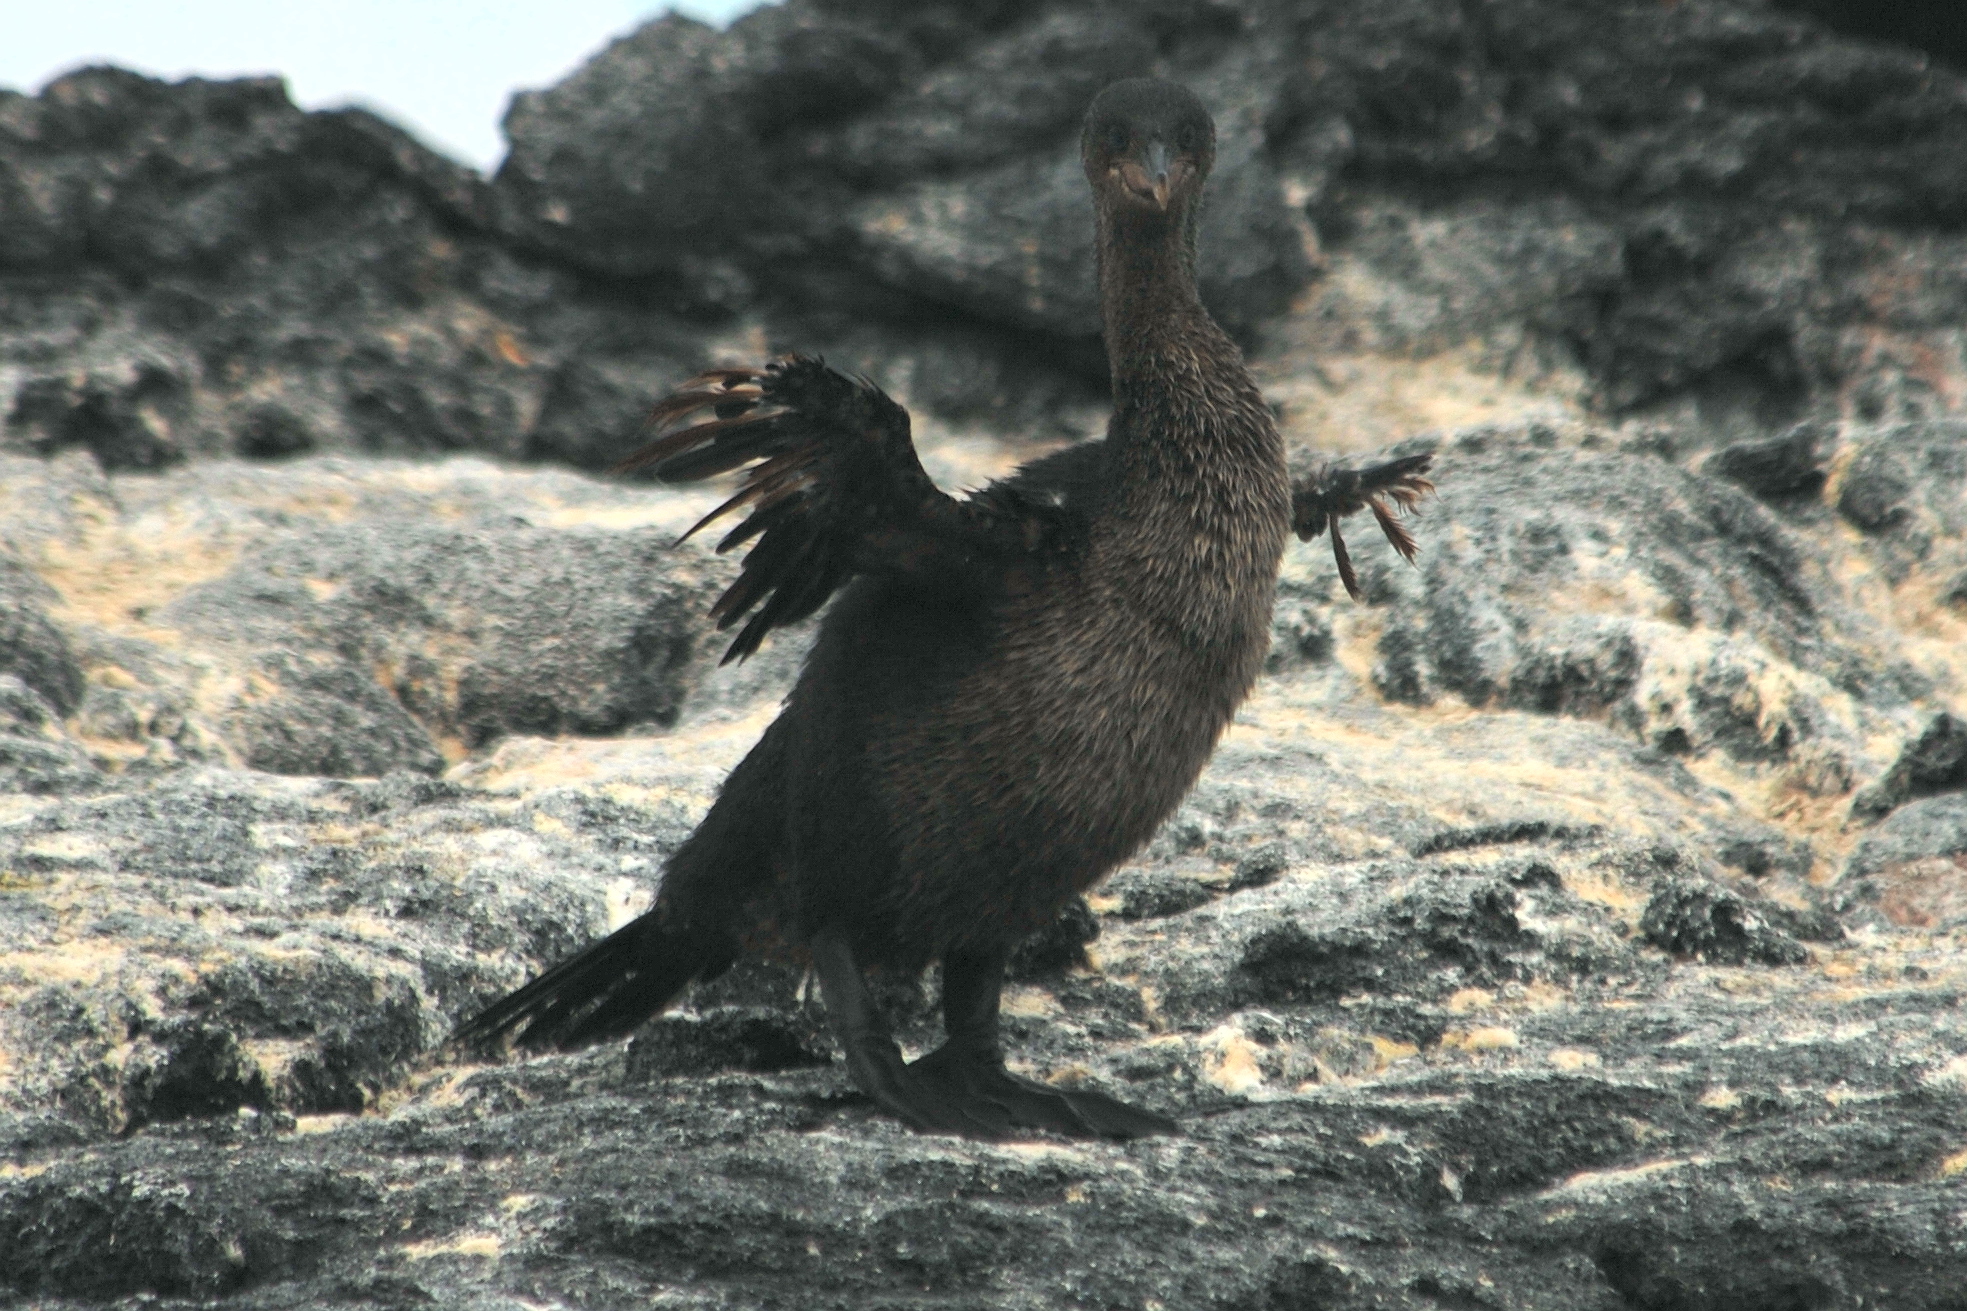 Click picture to see more Flightless Cormorants.